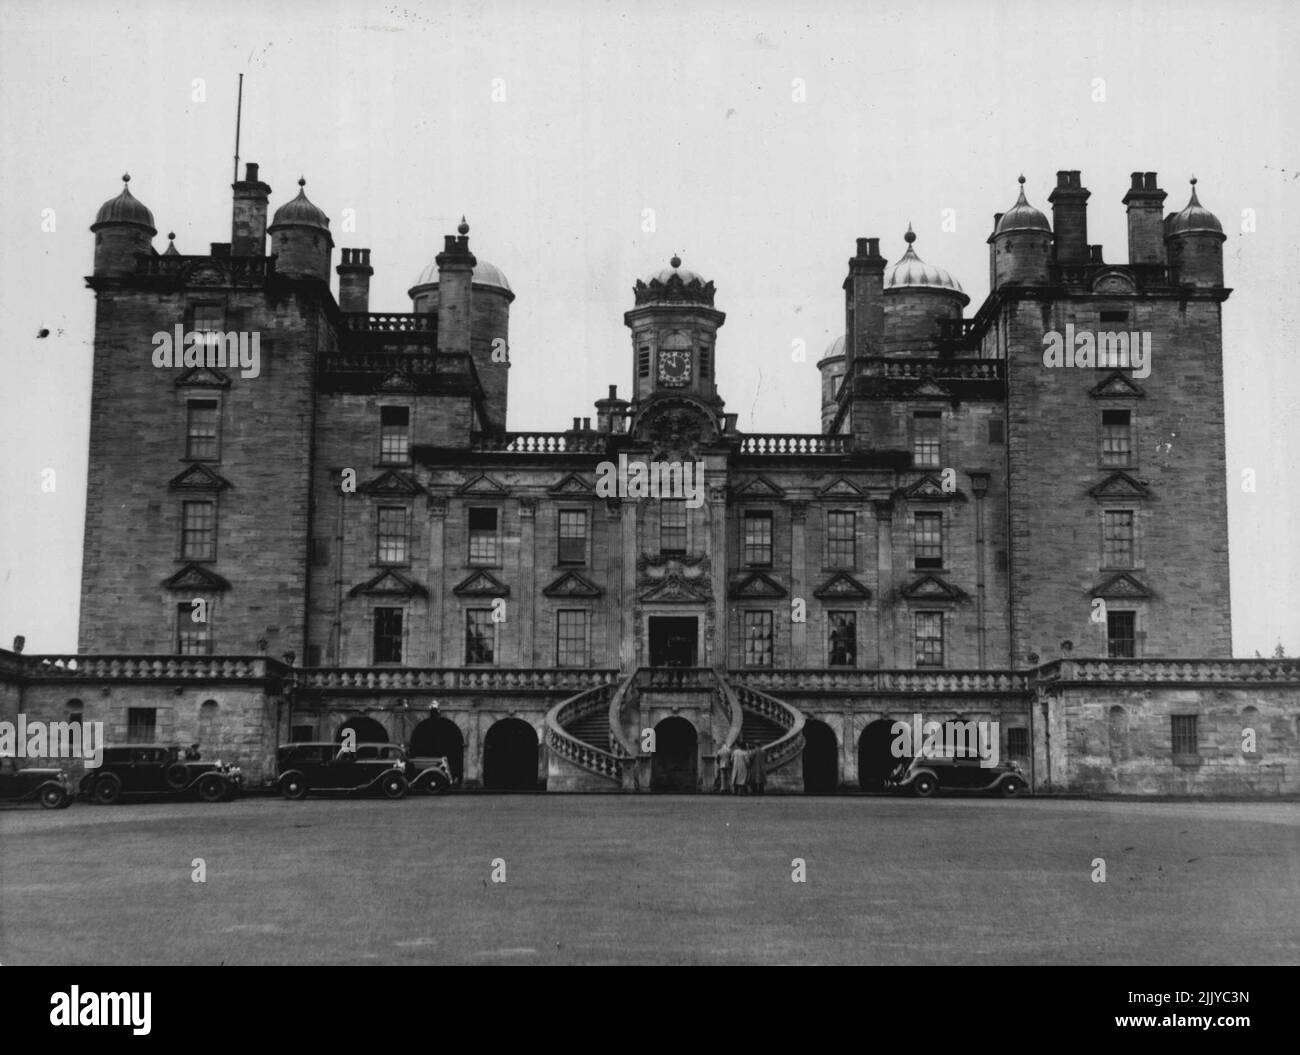 Drumlanrig castle, County home of the Earl of Dalkeith:- Drumlanrig castle , seat of the Duke of Buccleuch, is the home of the young Earl of Dalkeith ( heir to the Dukedom) whose engagement to princess Margaret will - a French newspaper reported , be announced in August, Drumlanrig Castle is at Thornhill Dumfriesshire, Scotland. June 01, 1950. (Photo by Fox Photos). Stock Photo